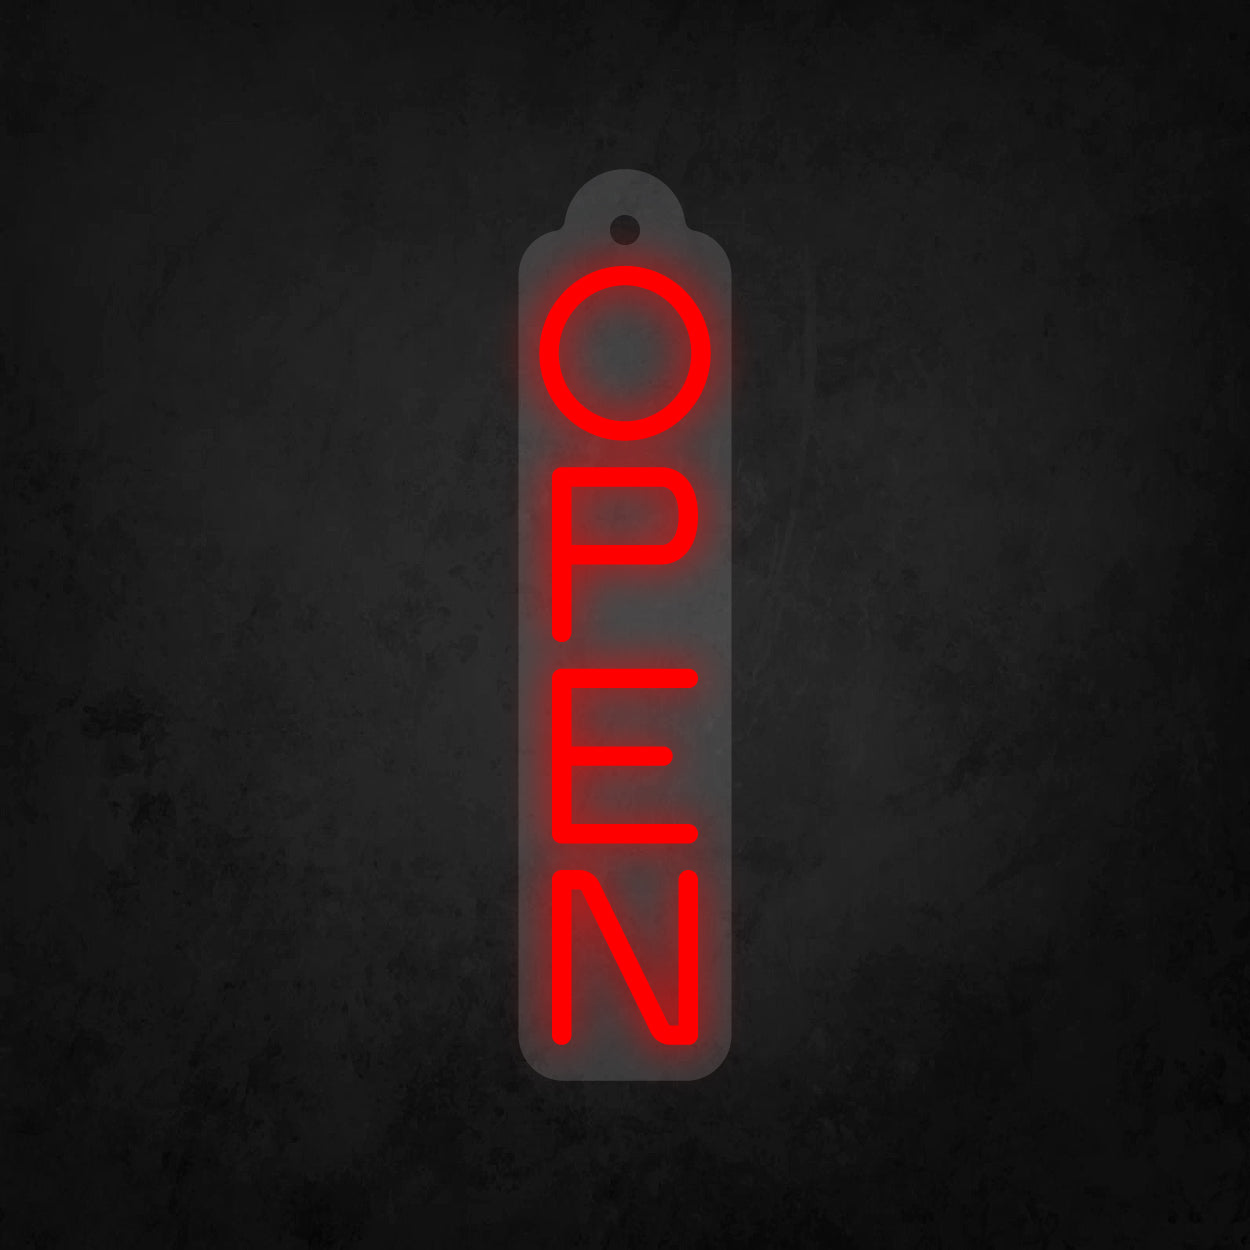 LED Neon Sign - Store Open Vertical Sign for Window